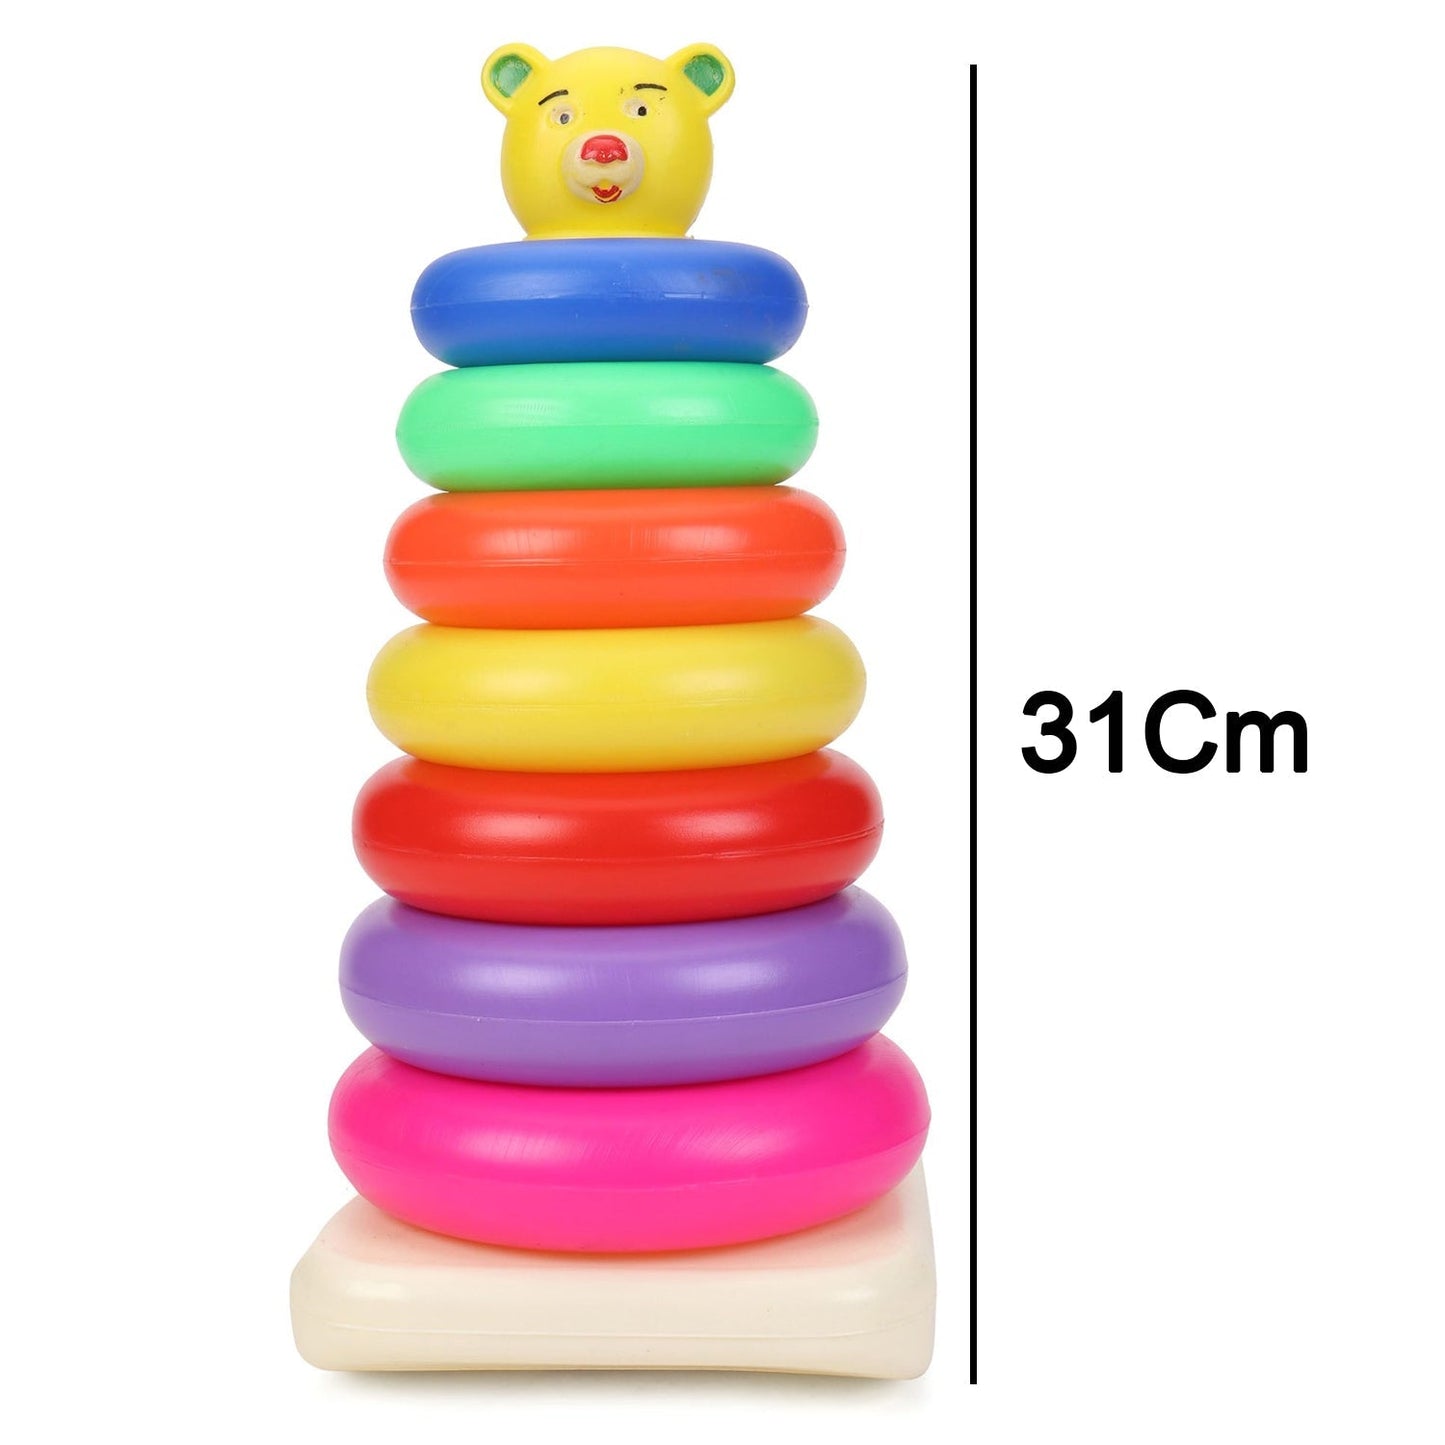 8016 Plastic Baby Kids Teddy Stacking Ring Jumbo Stack Up Educational Toy 7pc Dukandaily